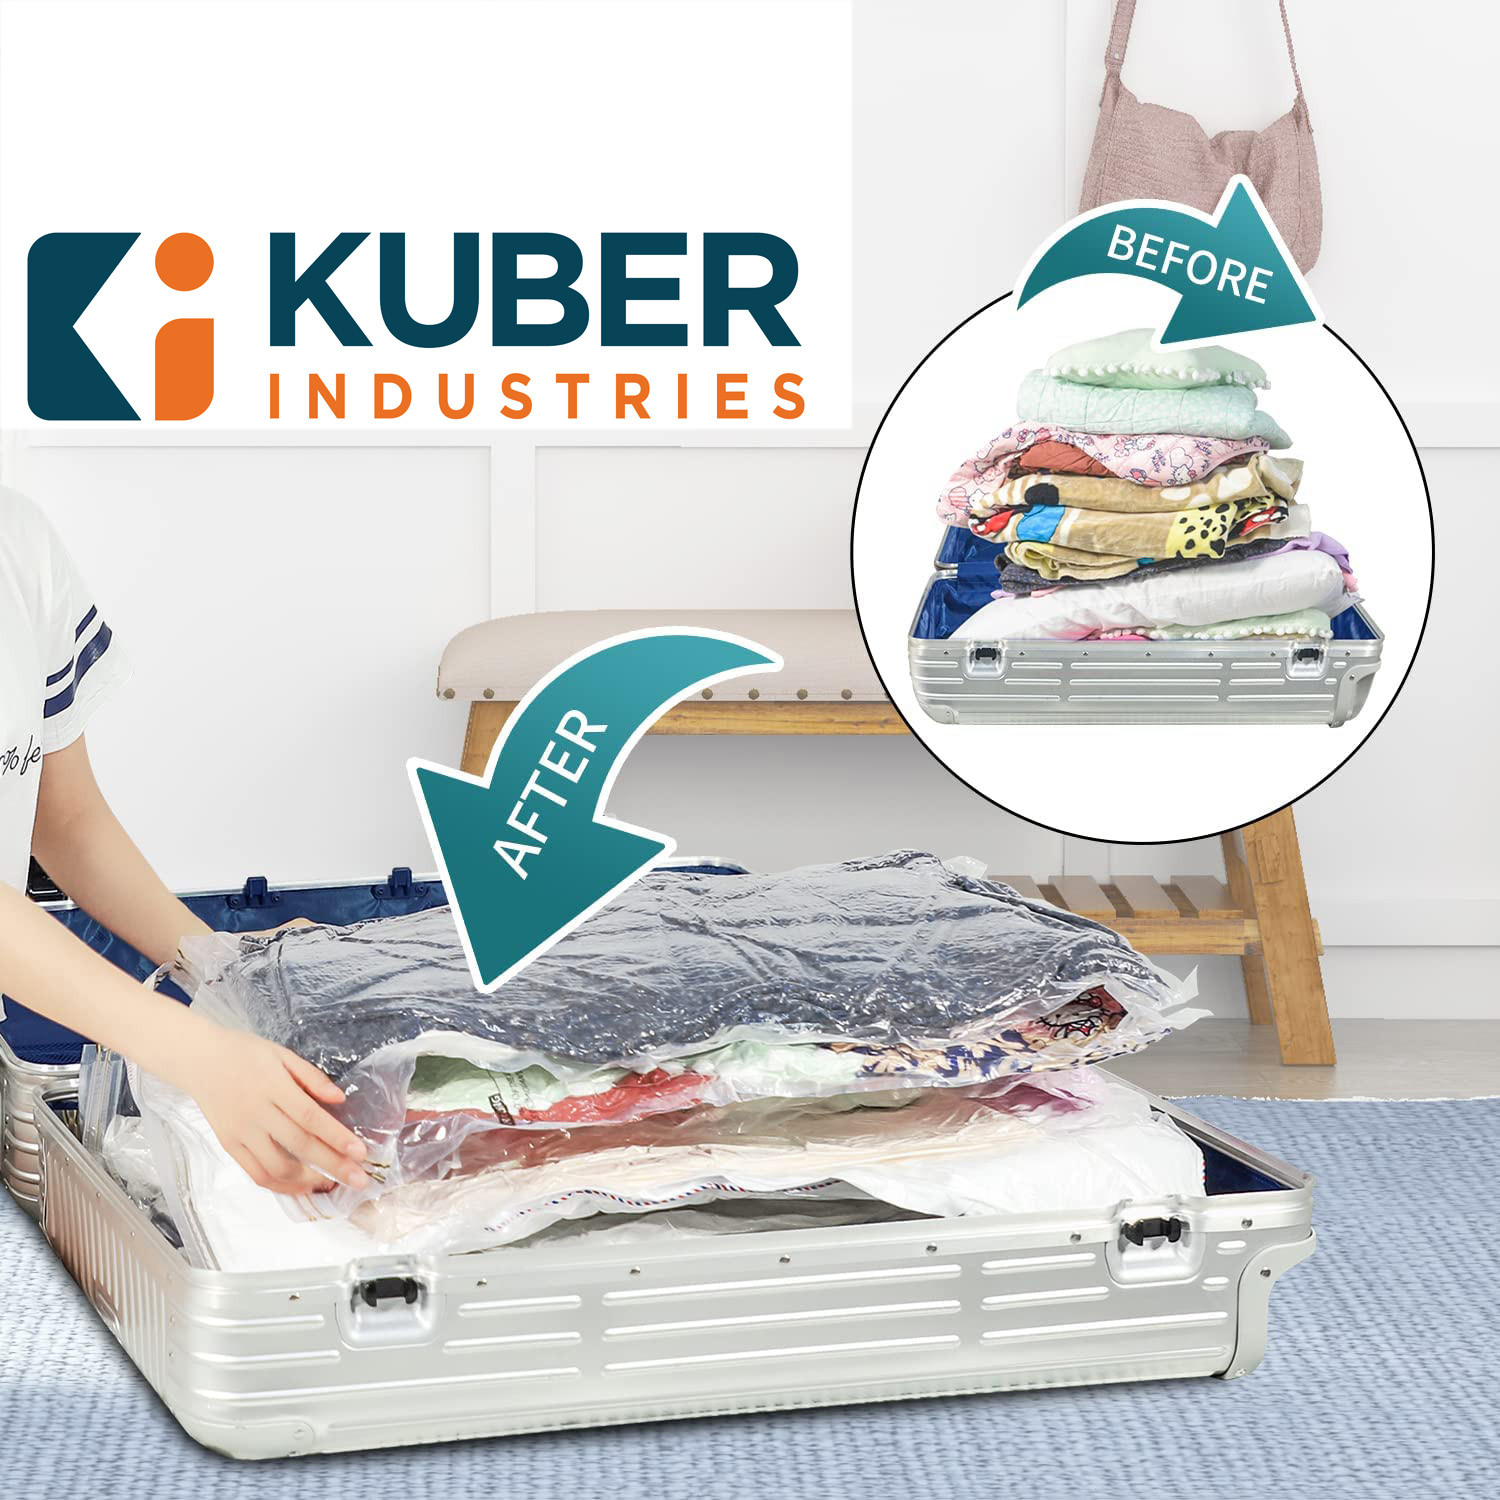 Kuber Industries Vacuum Storage Bags|Space Saver Bags|Travel Vacuum Storage Seal Bags for Comforters Blankets Clothes Pillows With Hand Pump,60x80 cm,(Transparent)